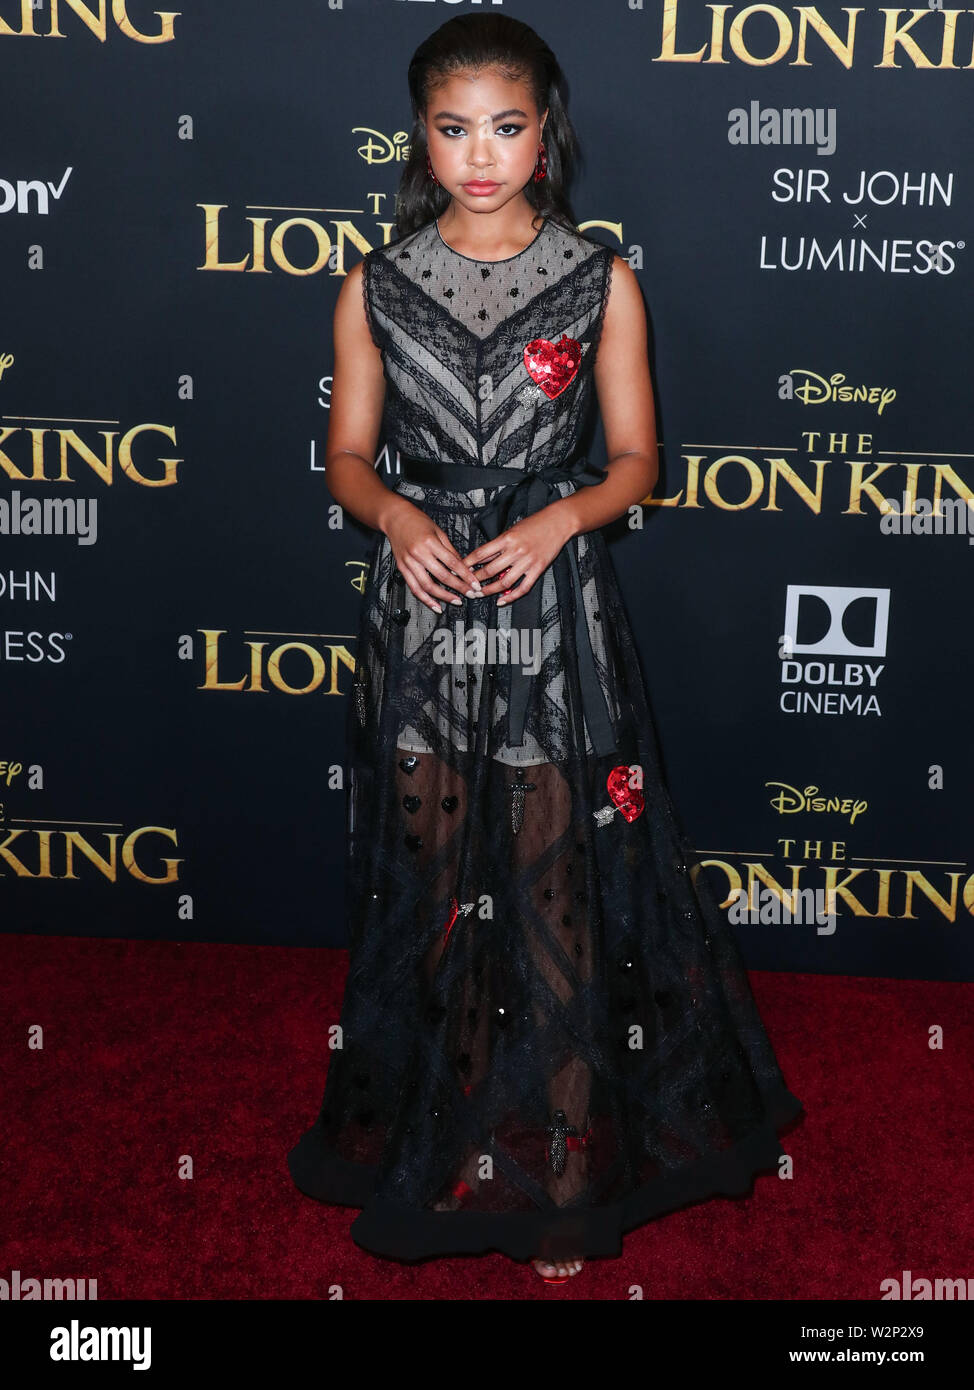 HOLLYWOOD, LOS ANGELES, CALIFORNIA, USA - JULY 09: Actress Navia Robinson arrives at the World Premiere Of Disney's 'The Lion King' held at the Dolby Theatre on July 9, 2019 in Hollywood, Los Angeles, California, United States. (Photo by Xavier Collin/Image Press Agency) Stock Photo